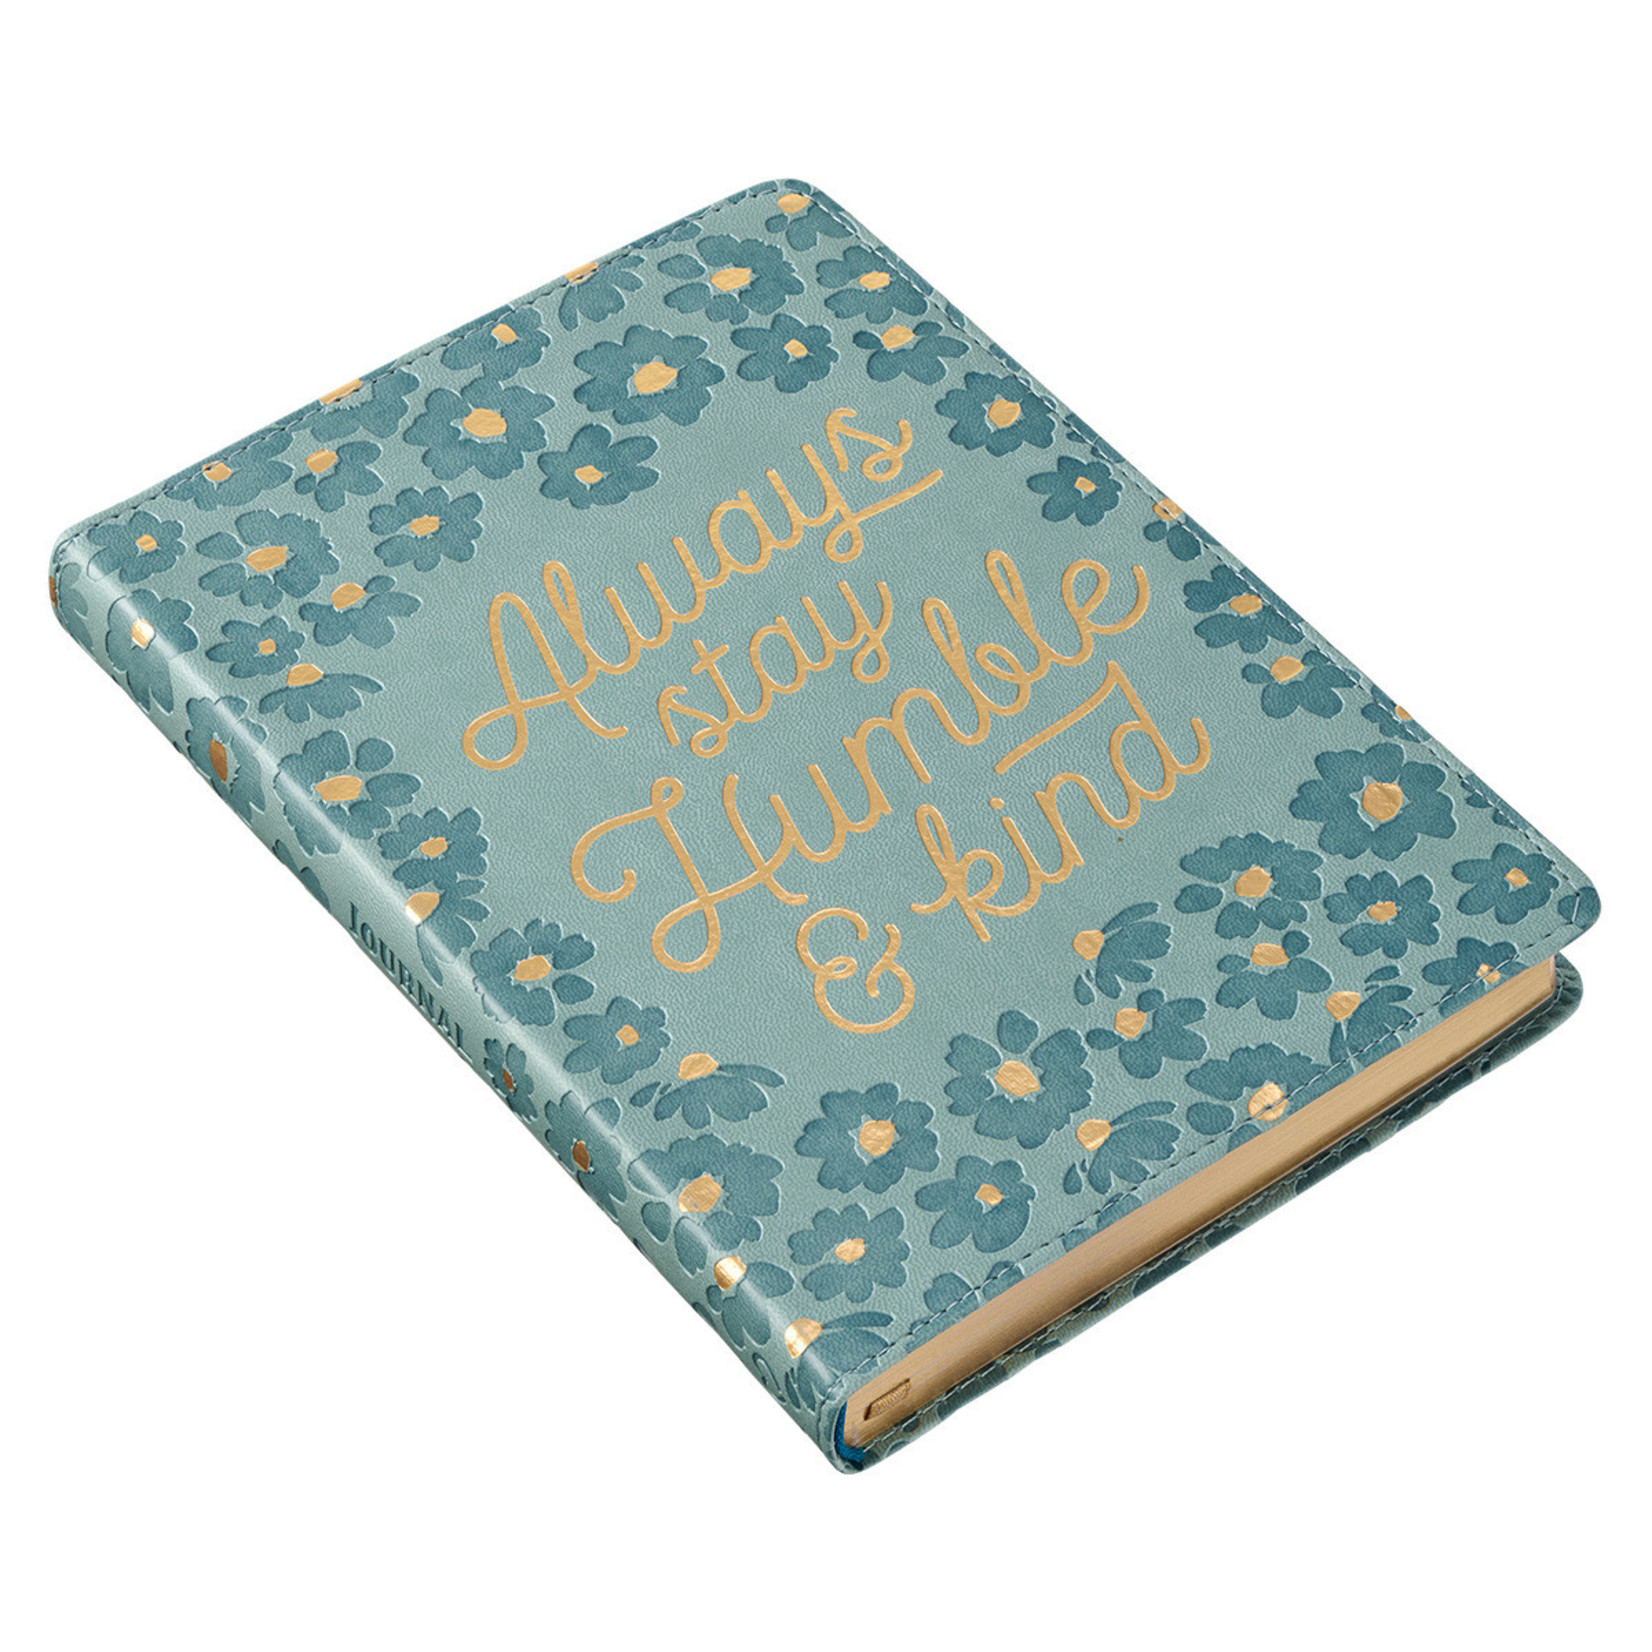 Christian Art Gifts Always Stay Humble and Kind Teal Faux Leather Classic Journal